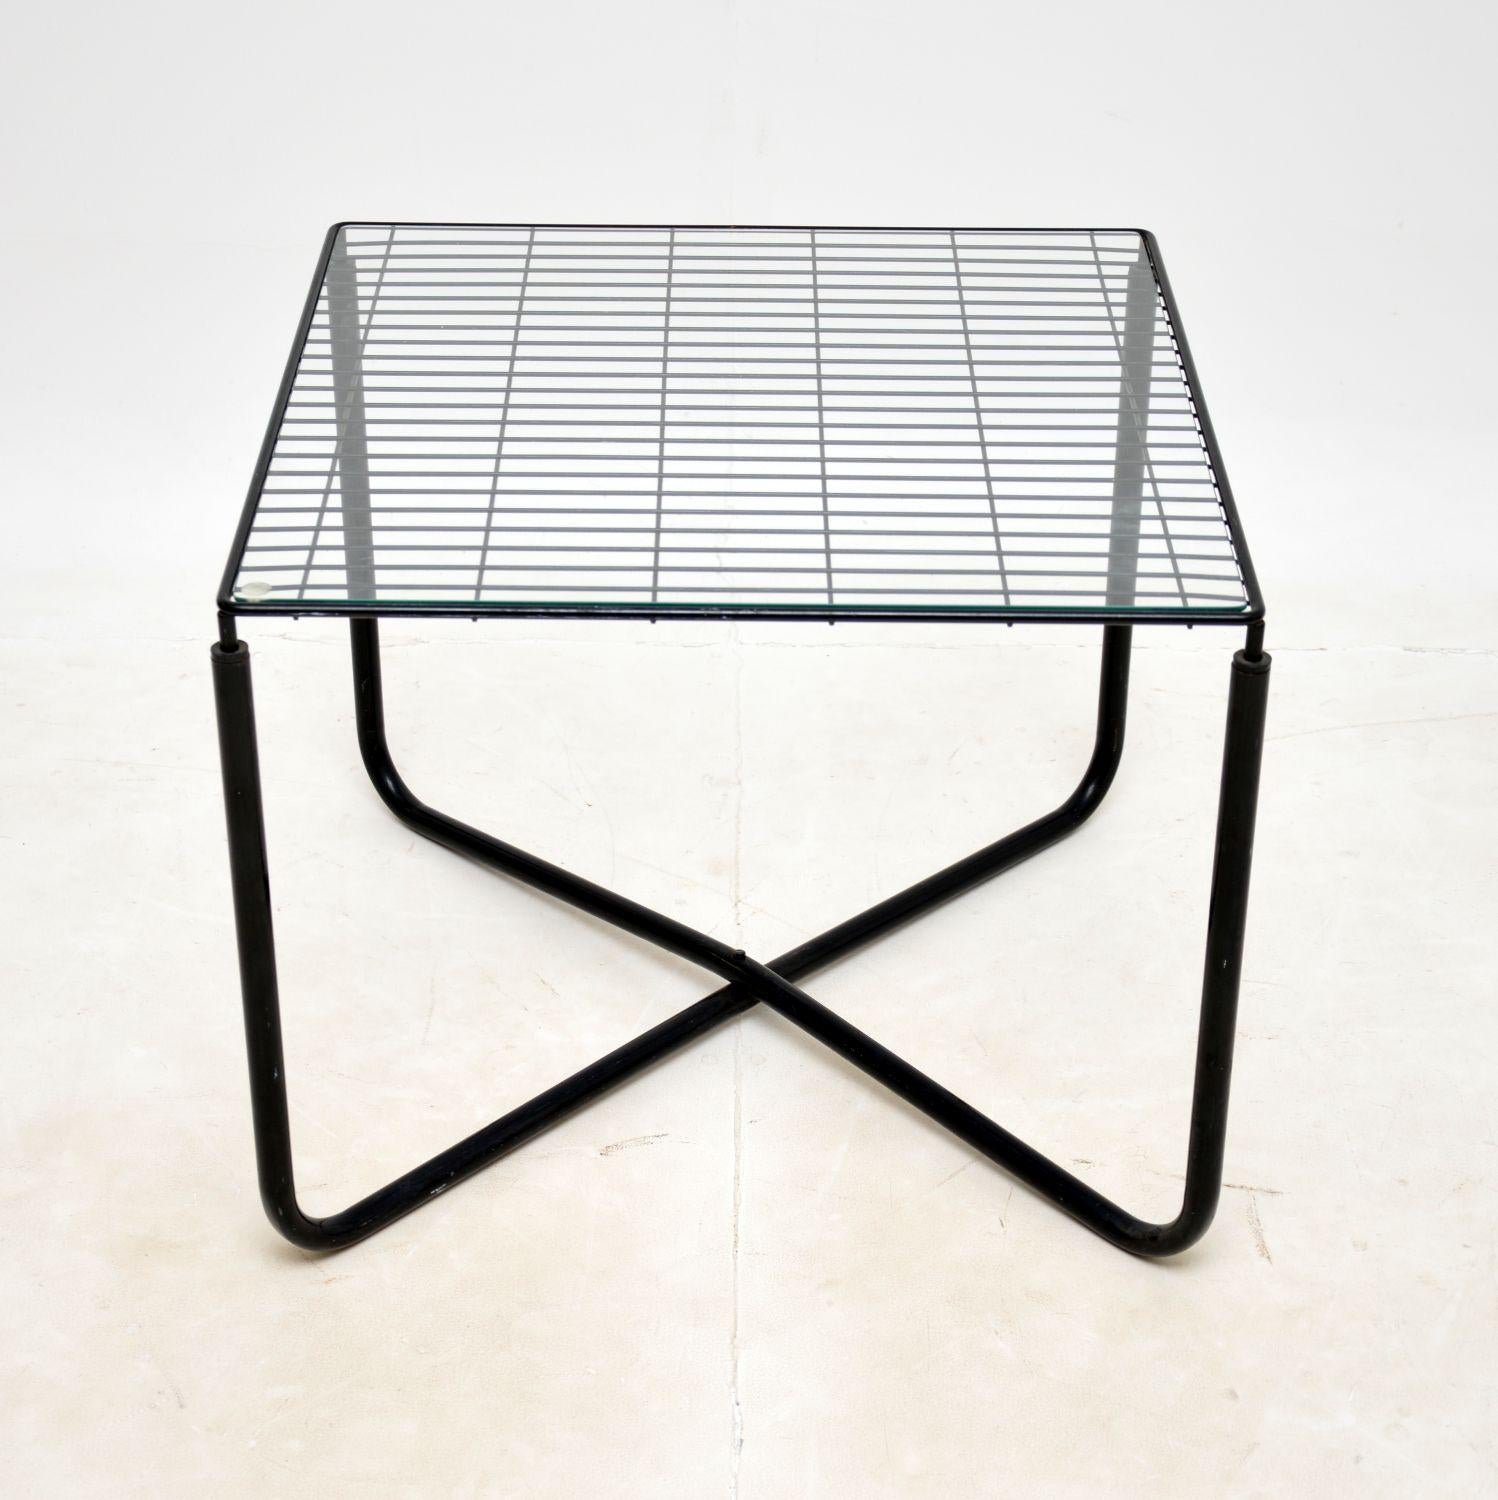 A stylish and iconic design, this is a 1980’s Vintage Jarpen coffee table by Niels Gammelgaard for Ikea.

The quality is excellent, this has a beautiful ebonised steel frame with an inset removable clear glass top.

The condition is excellent for